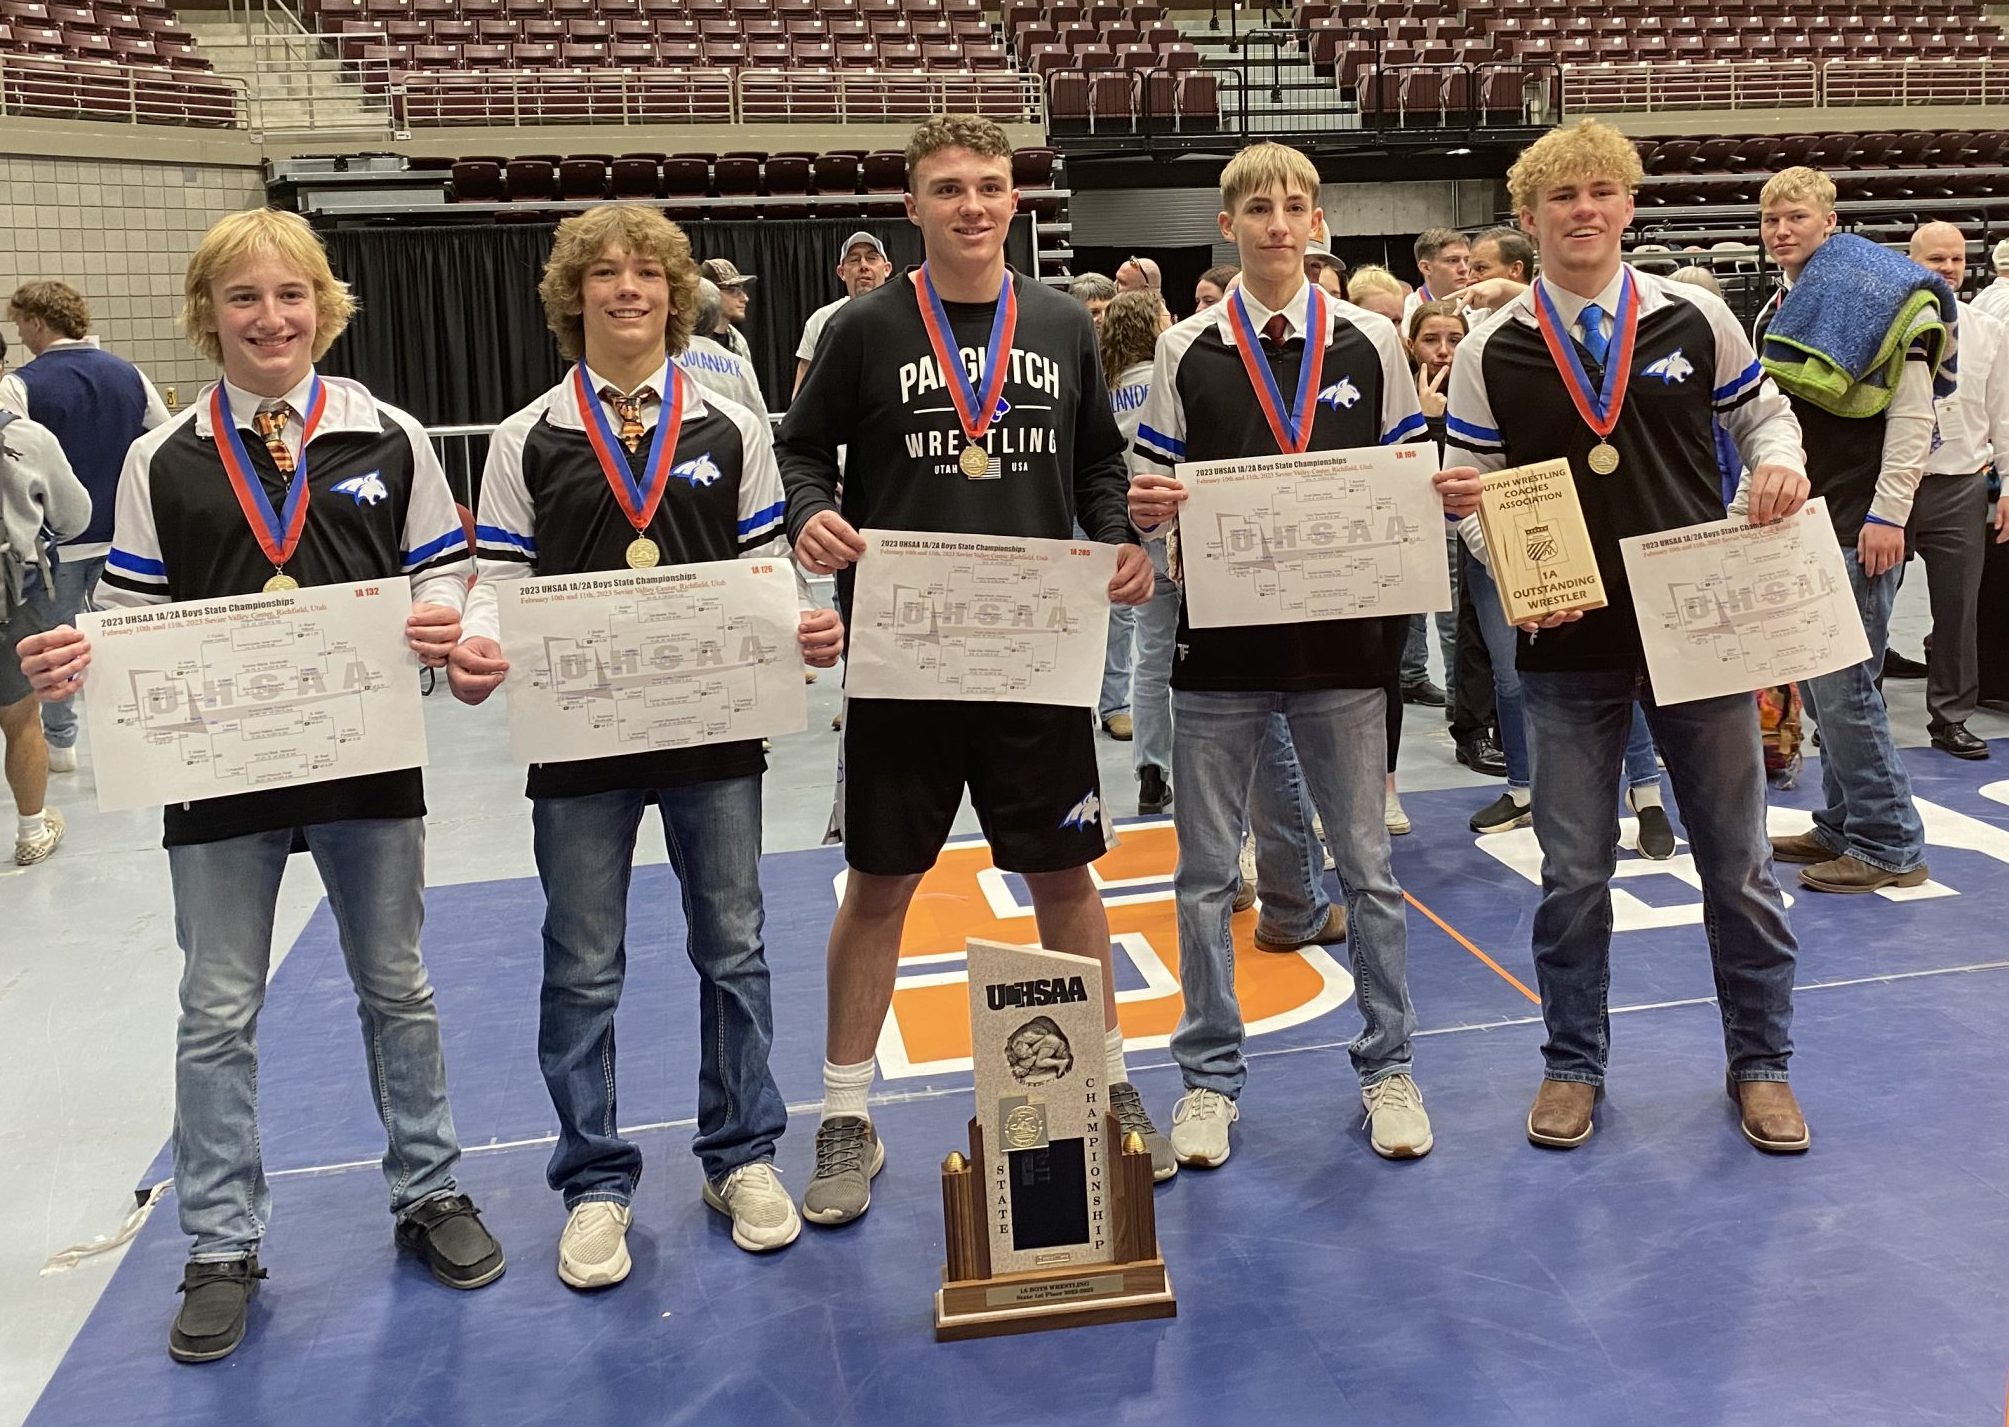 Holland, Nartatez, Oani among top-10 seeds for state wrestling  championships, High School